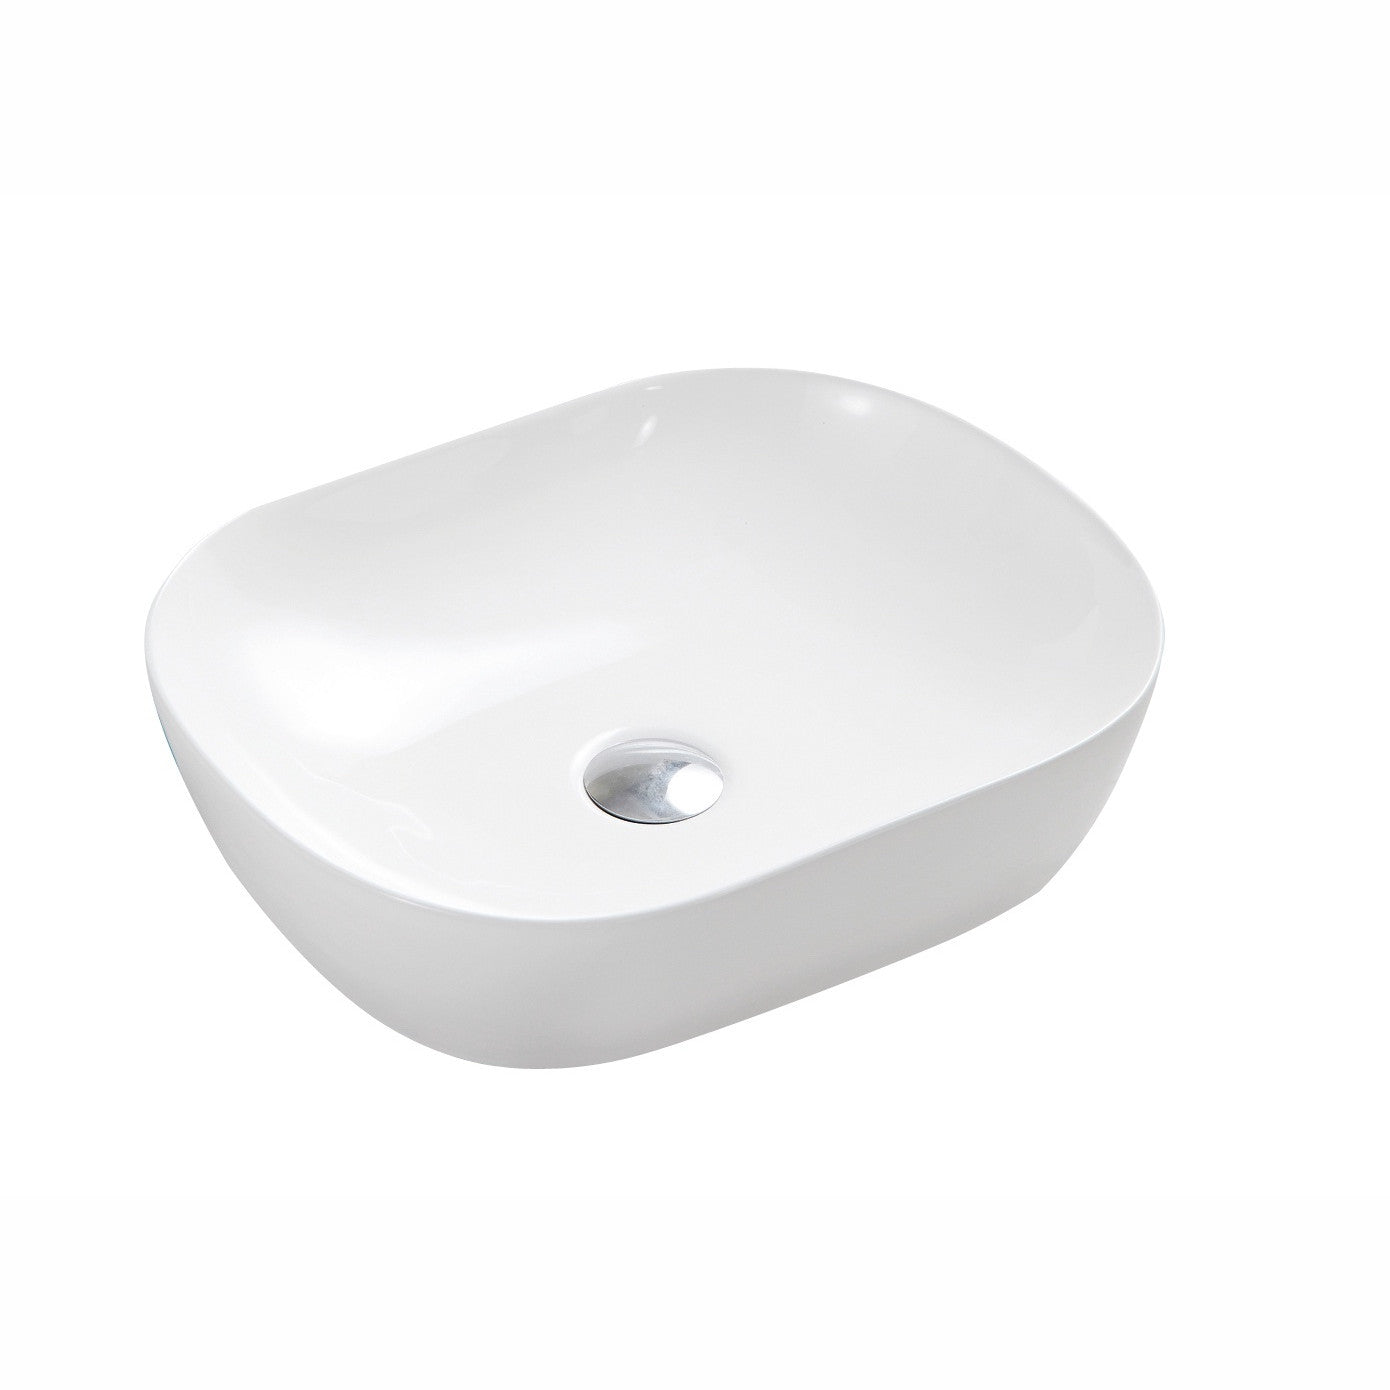 BASIN PA4939: Stylish and Versatile Solution For Your Space